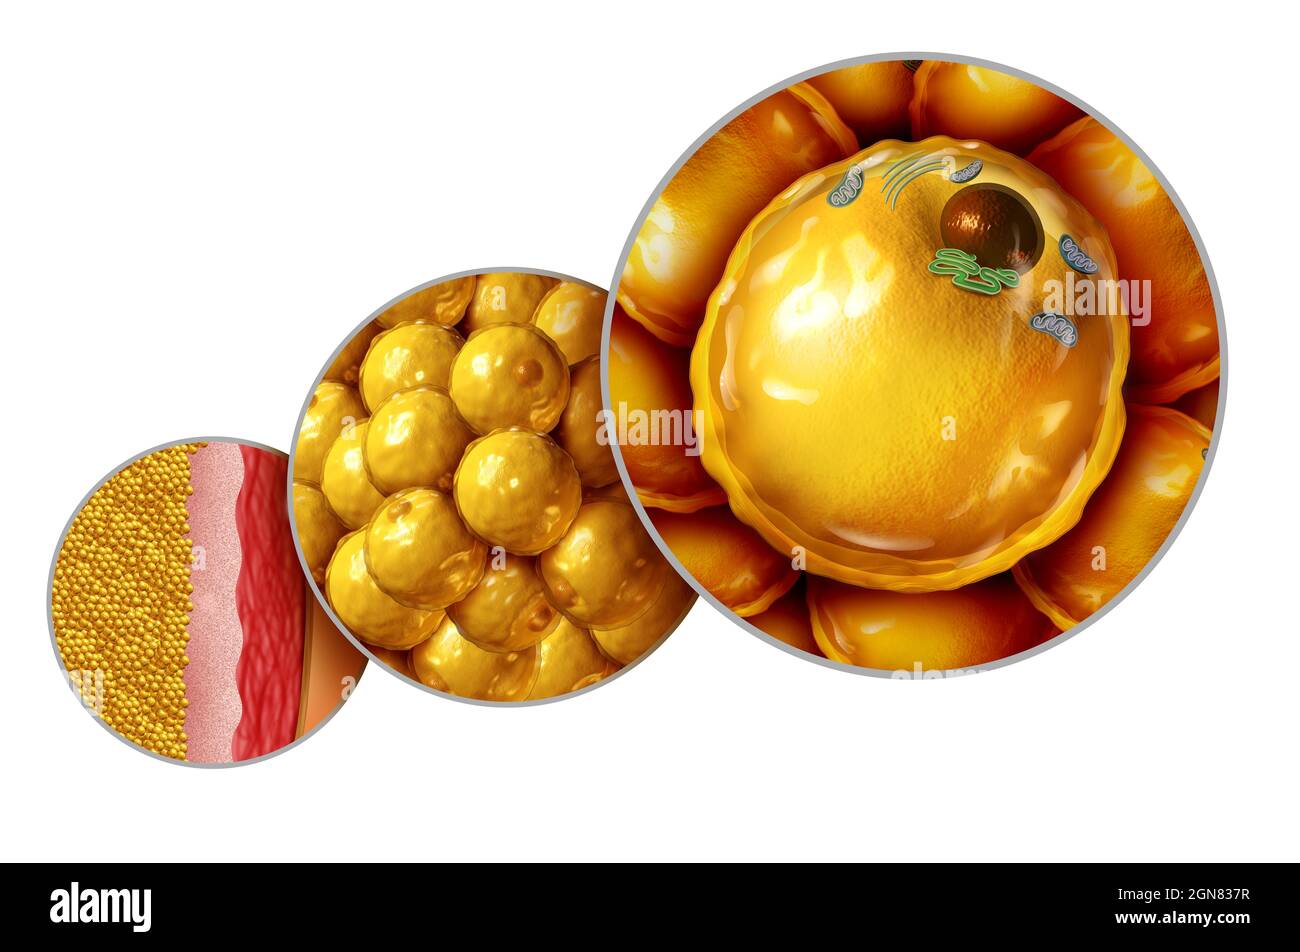 Fat cell anatomy and gaining weight or overweight and obesity symbol as a medical health concept as a microscopic diagram with mitochondria nucleus. Stock Photo